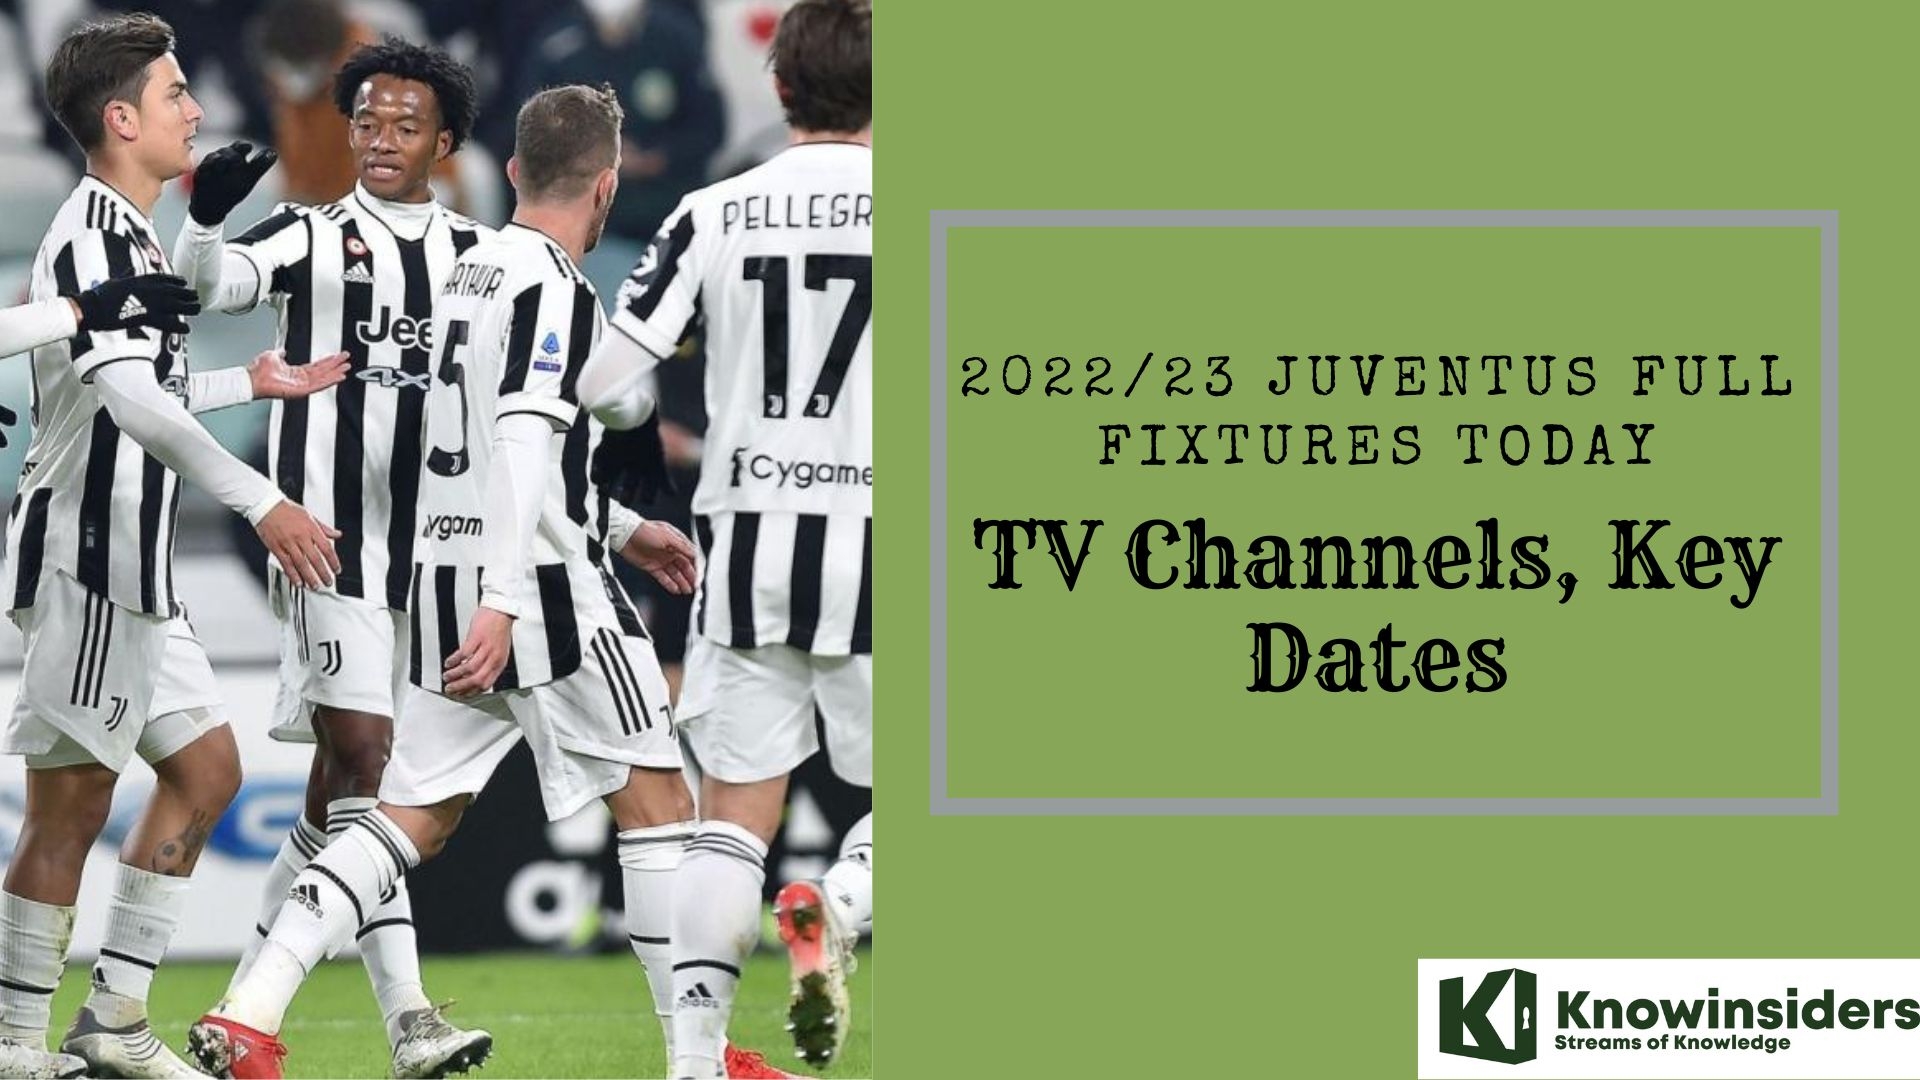 2022/23 Juventus Full Fixtures Today: TV Channels, Key Dates Knowinsiders.com 